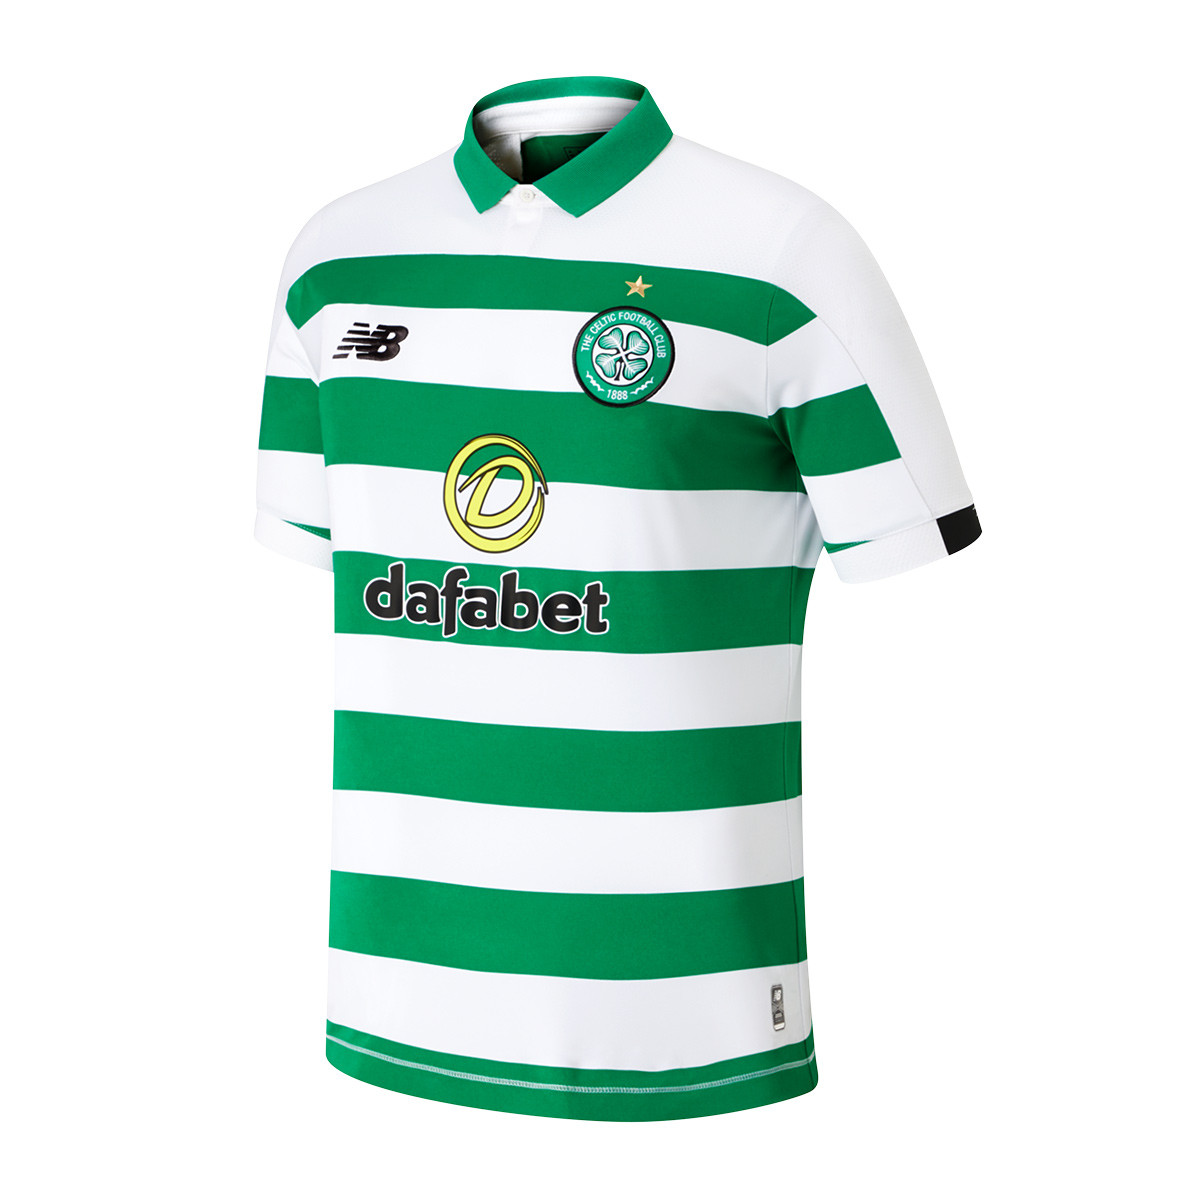 celtic jerseys throughout the years